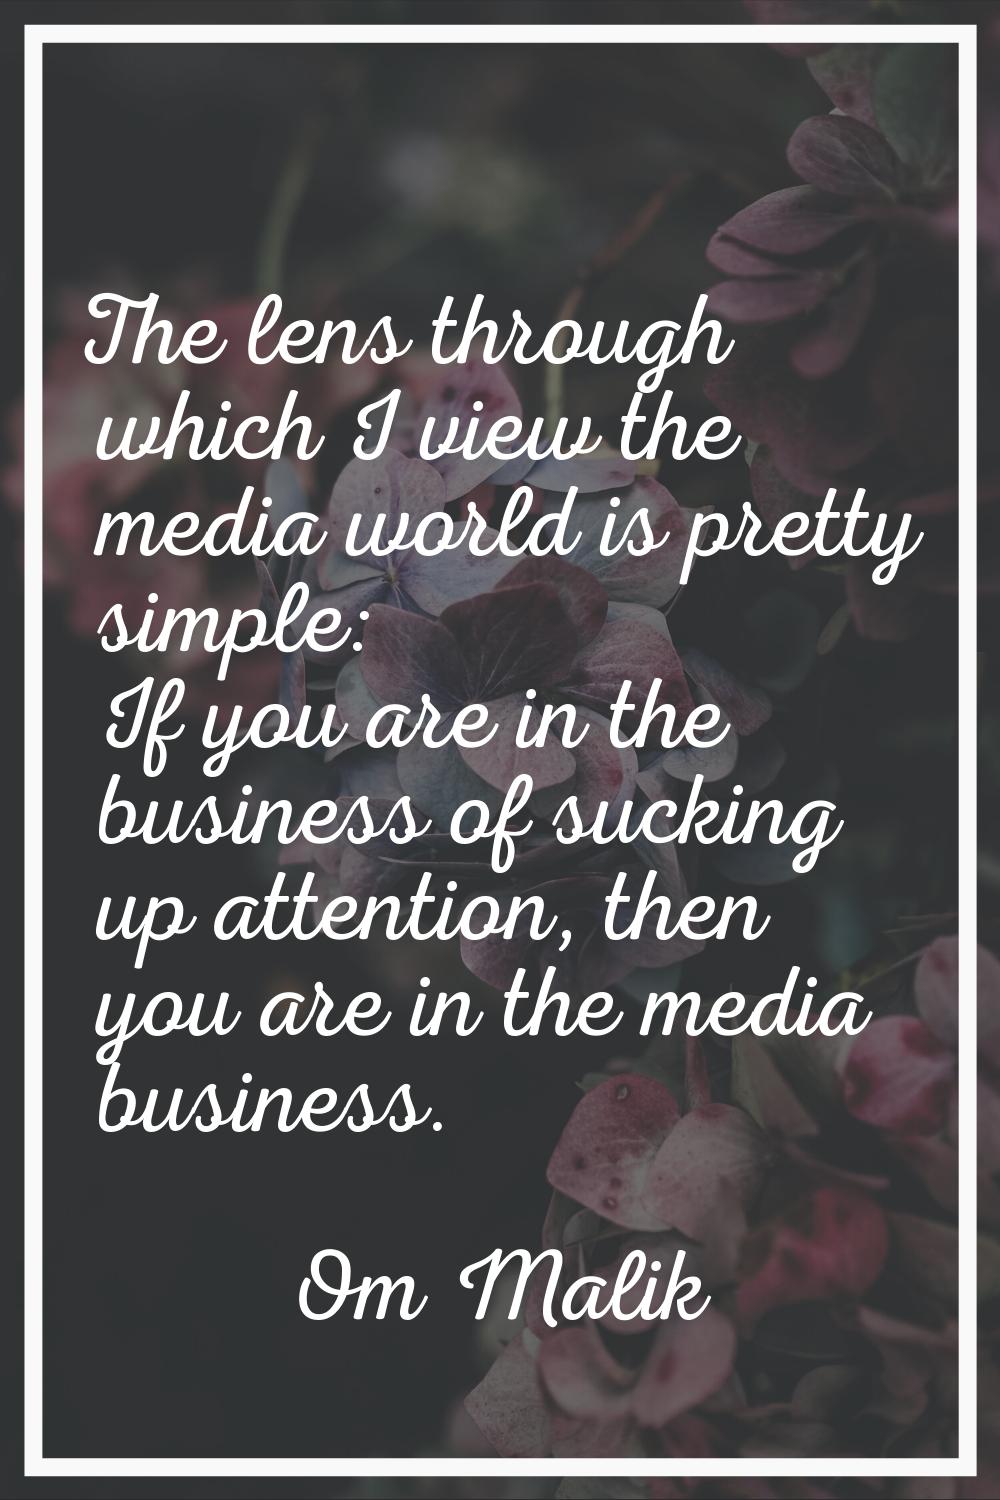 The lens through which I view the media world is pretty simple: If you are in the business of sucki